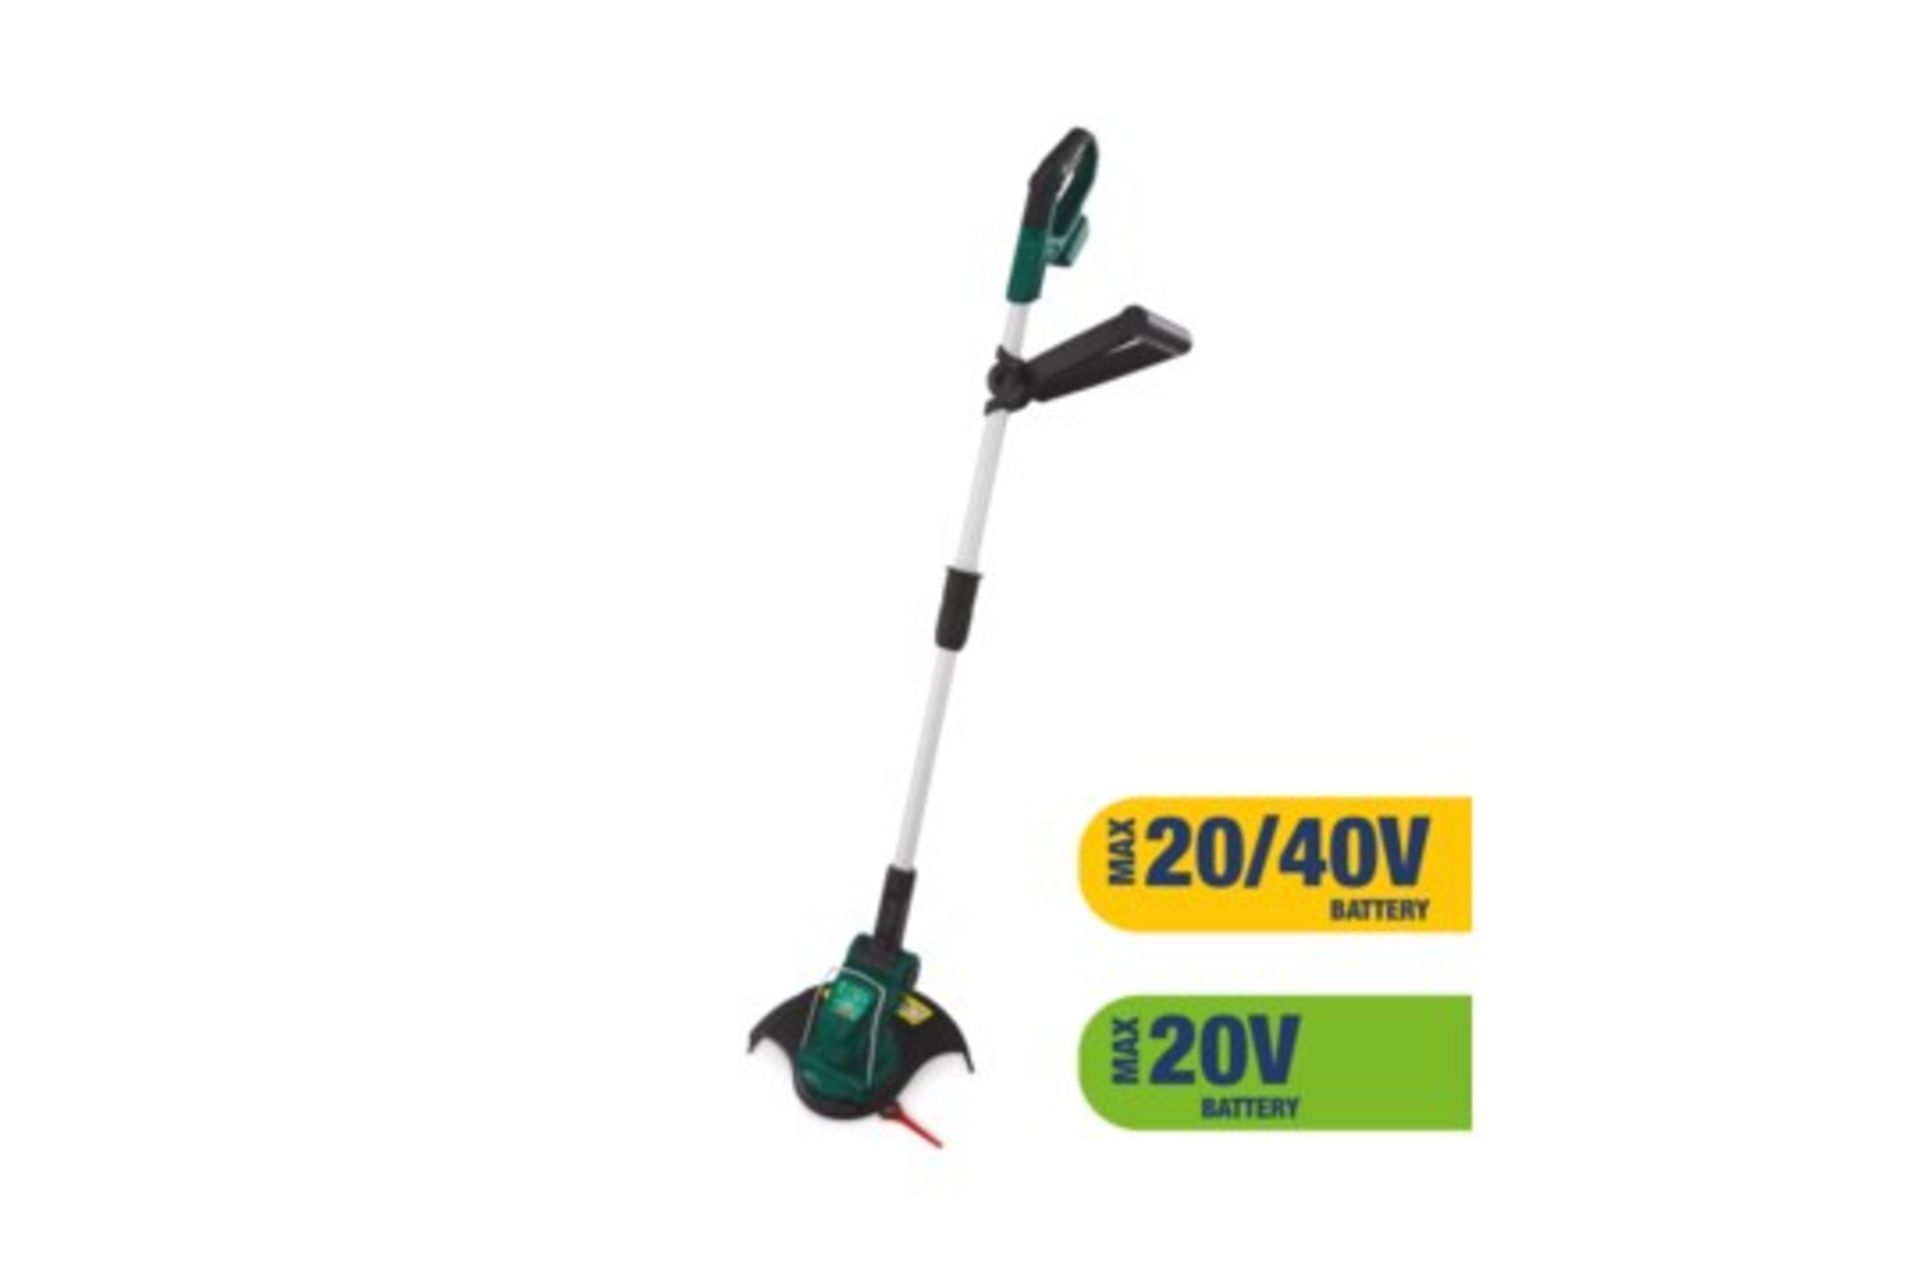 Boxed Ferrex 20V Lithium Telescopic Hedge Trimmer RRP £50 (Public Viewing and Appraisals Available)